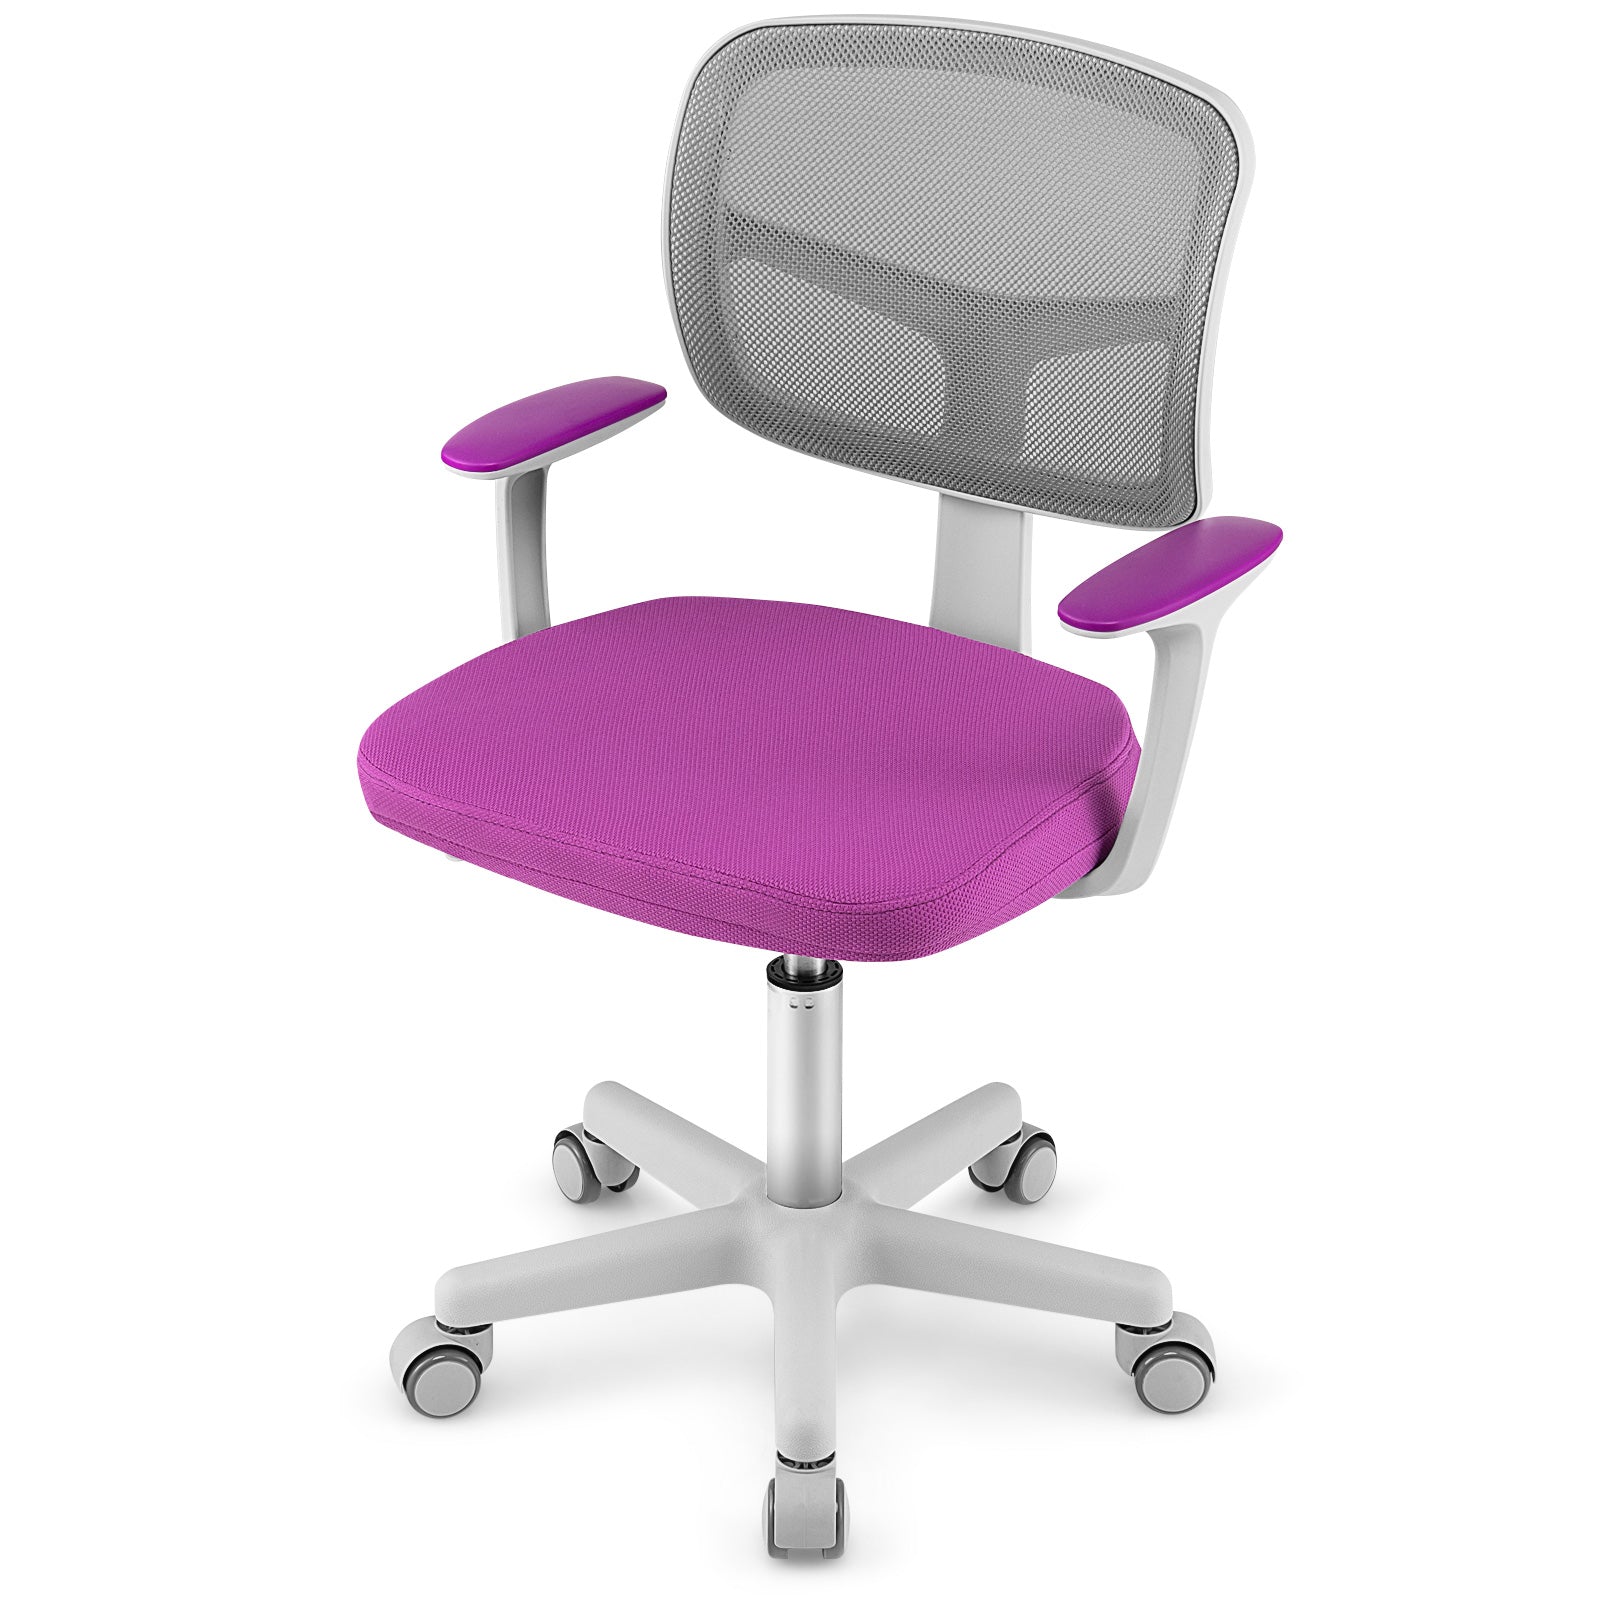 Kids Ergonomic Swivel Chair - Adjustable Height and 360° Rolling